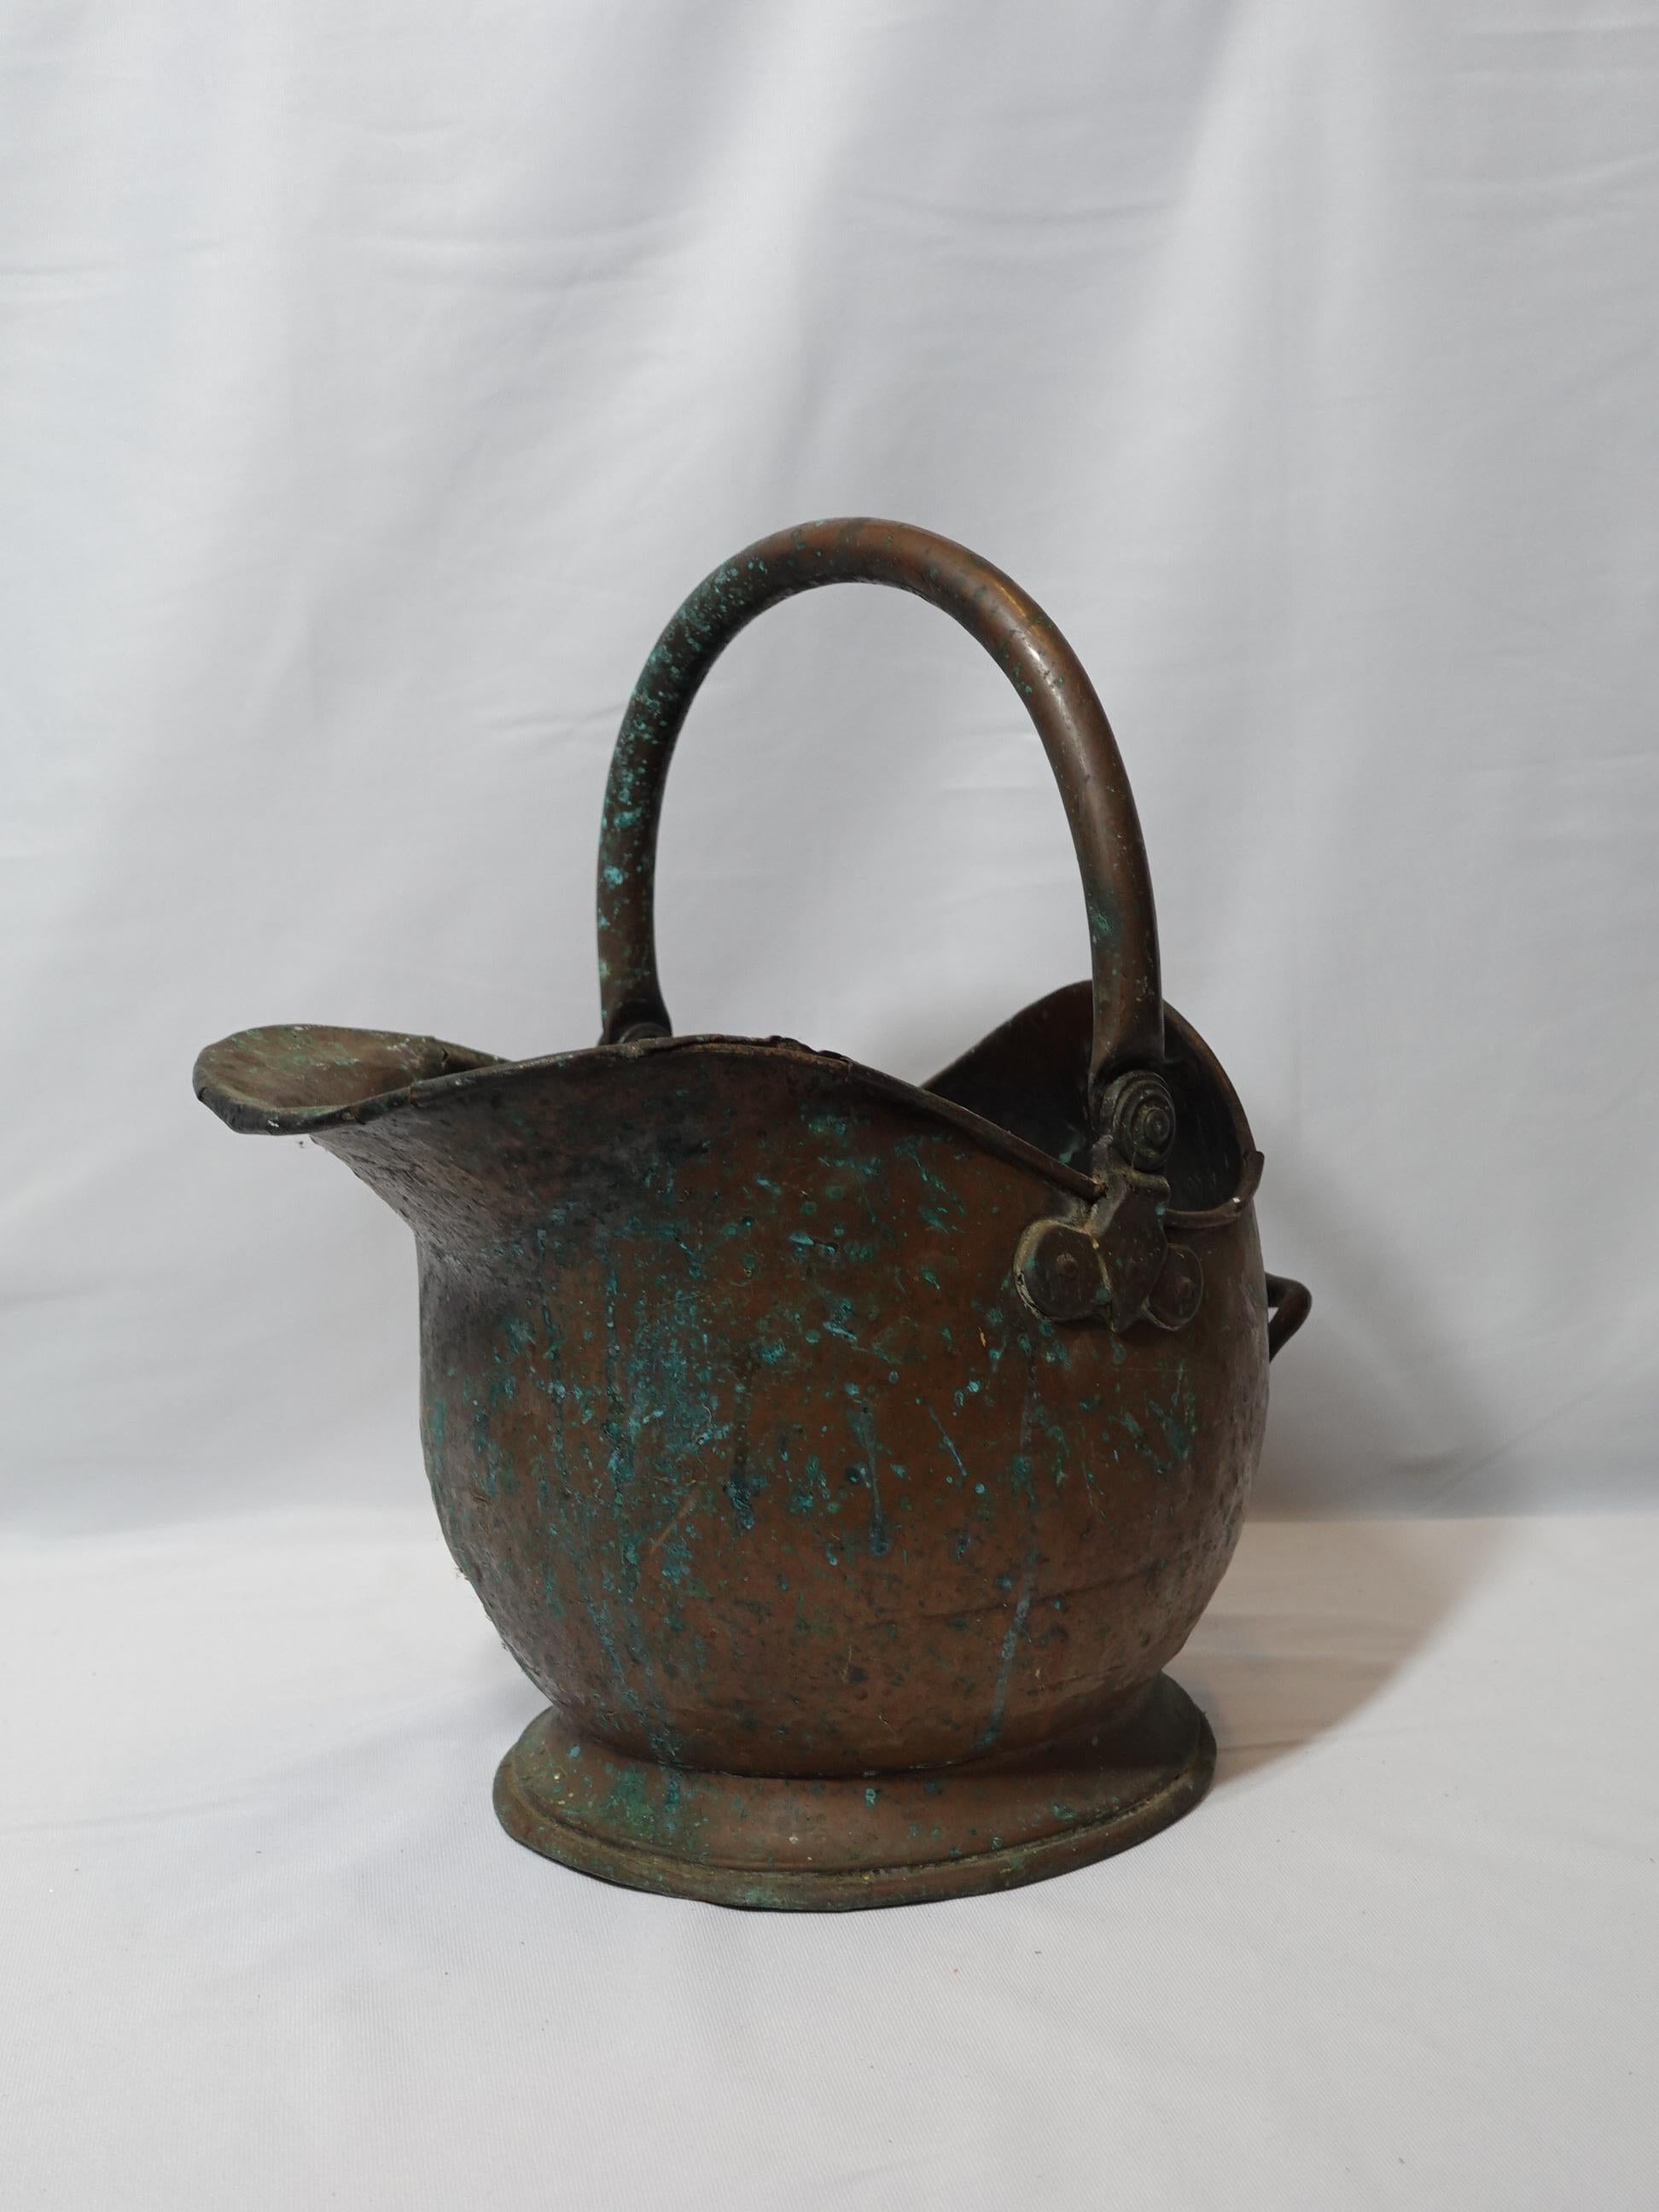 Antique Large Solid Hand Hammered Copper Coal Scuttle With Handle, 19th Century In Good Condition For Sale In Norton, MA